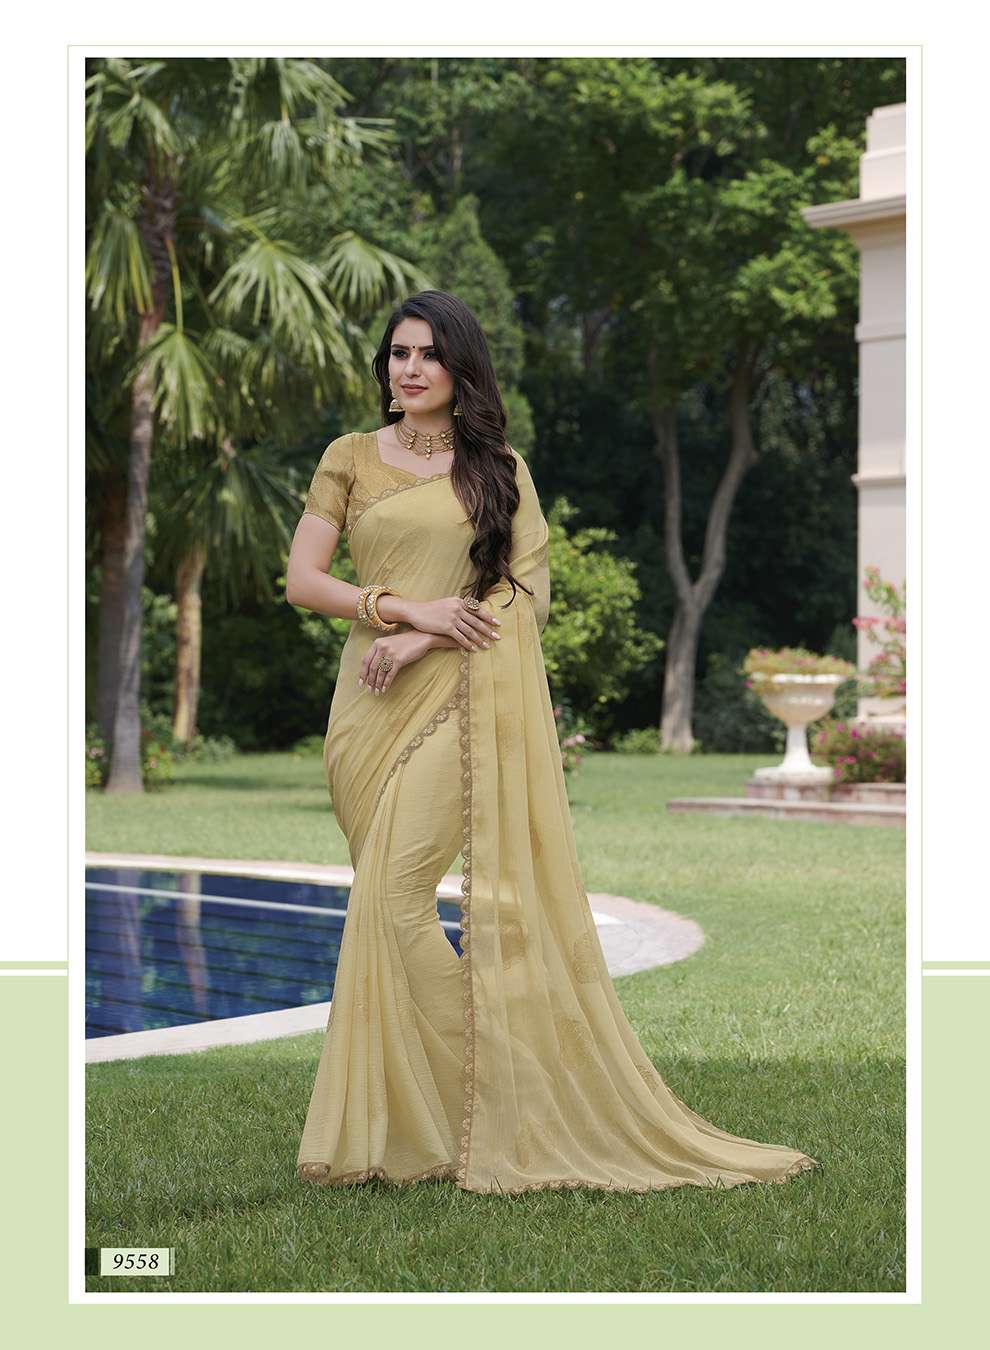 TEMPTATION VOL-227 BY SUBHASH SAREES 9551 TO 9562 SERIES INDIAN TRADITIONAL WEAR COLLECTION BEAUTIFUL STYLISH FANCY COLORFUL PARTY WEAR & OCCASIONAL WEAR GEORGETTE/CHIFFON/BRASSO SAREES AT WHOLESALE PRICE